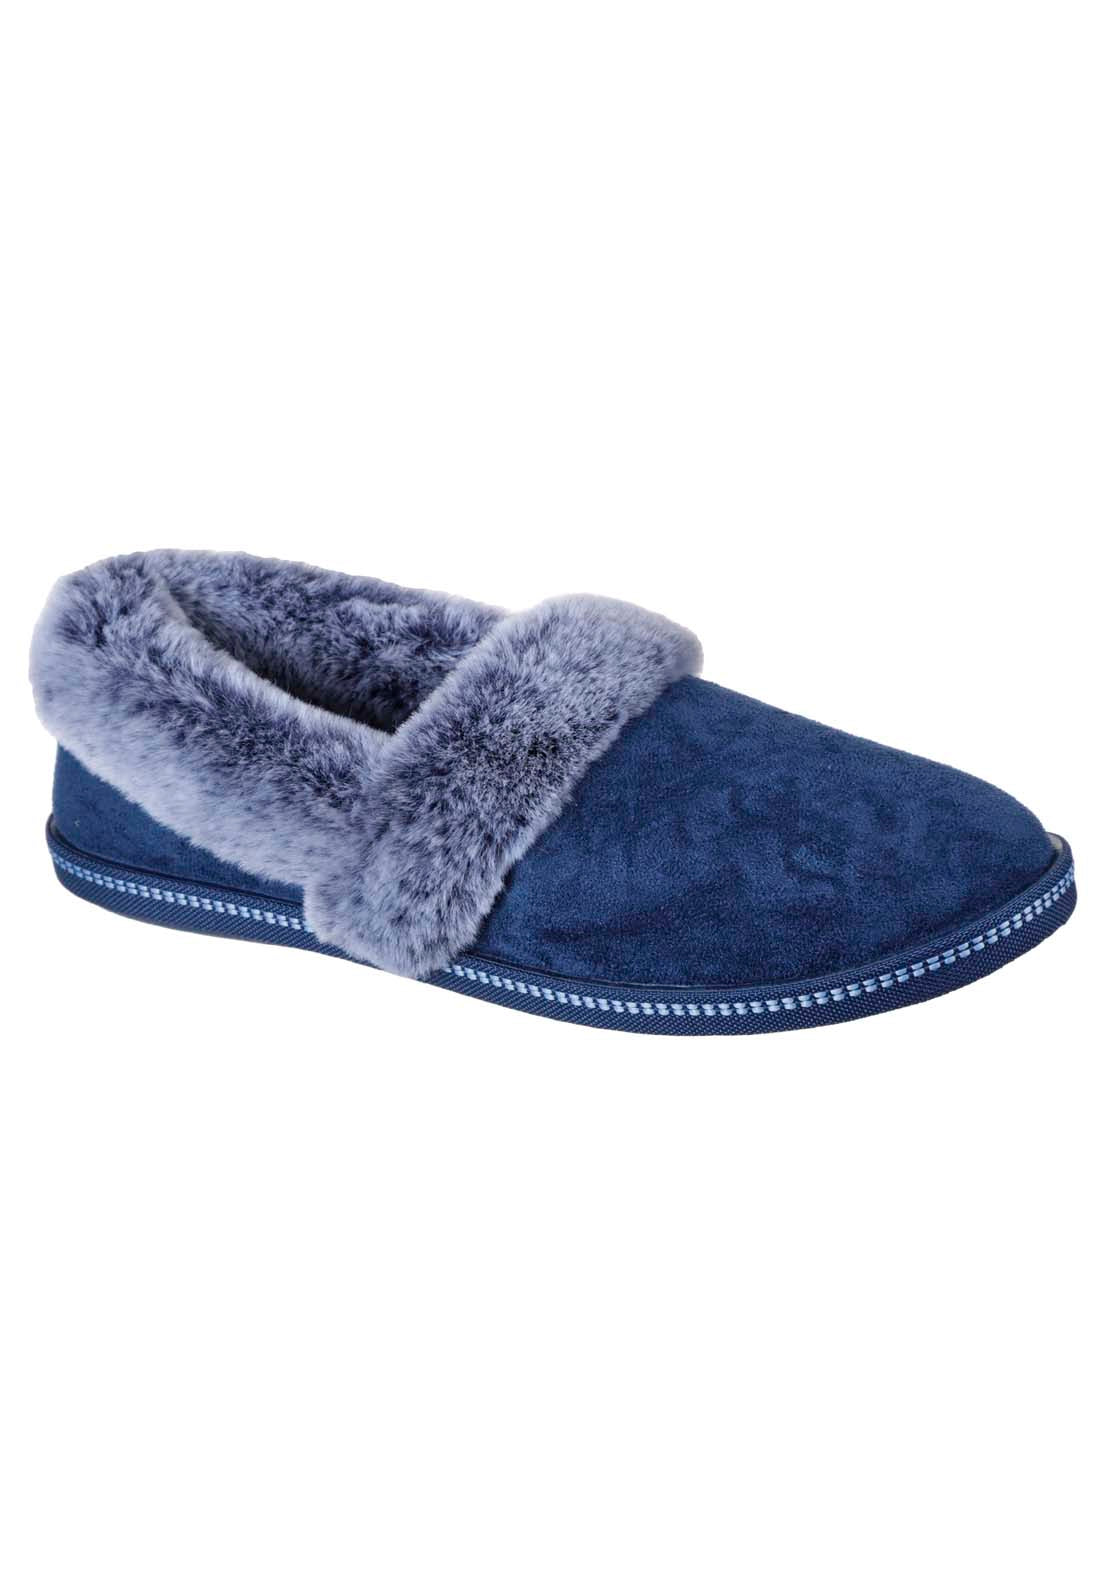 Skechers Cosy Campfire Slipper - Navy 1 Shaws Department Stores